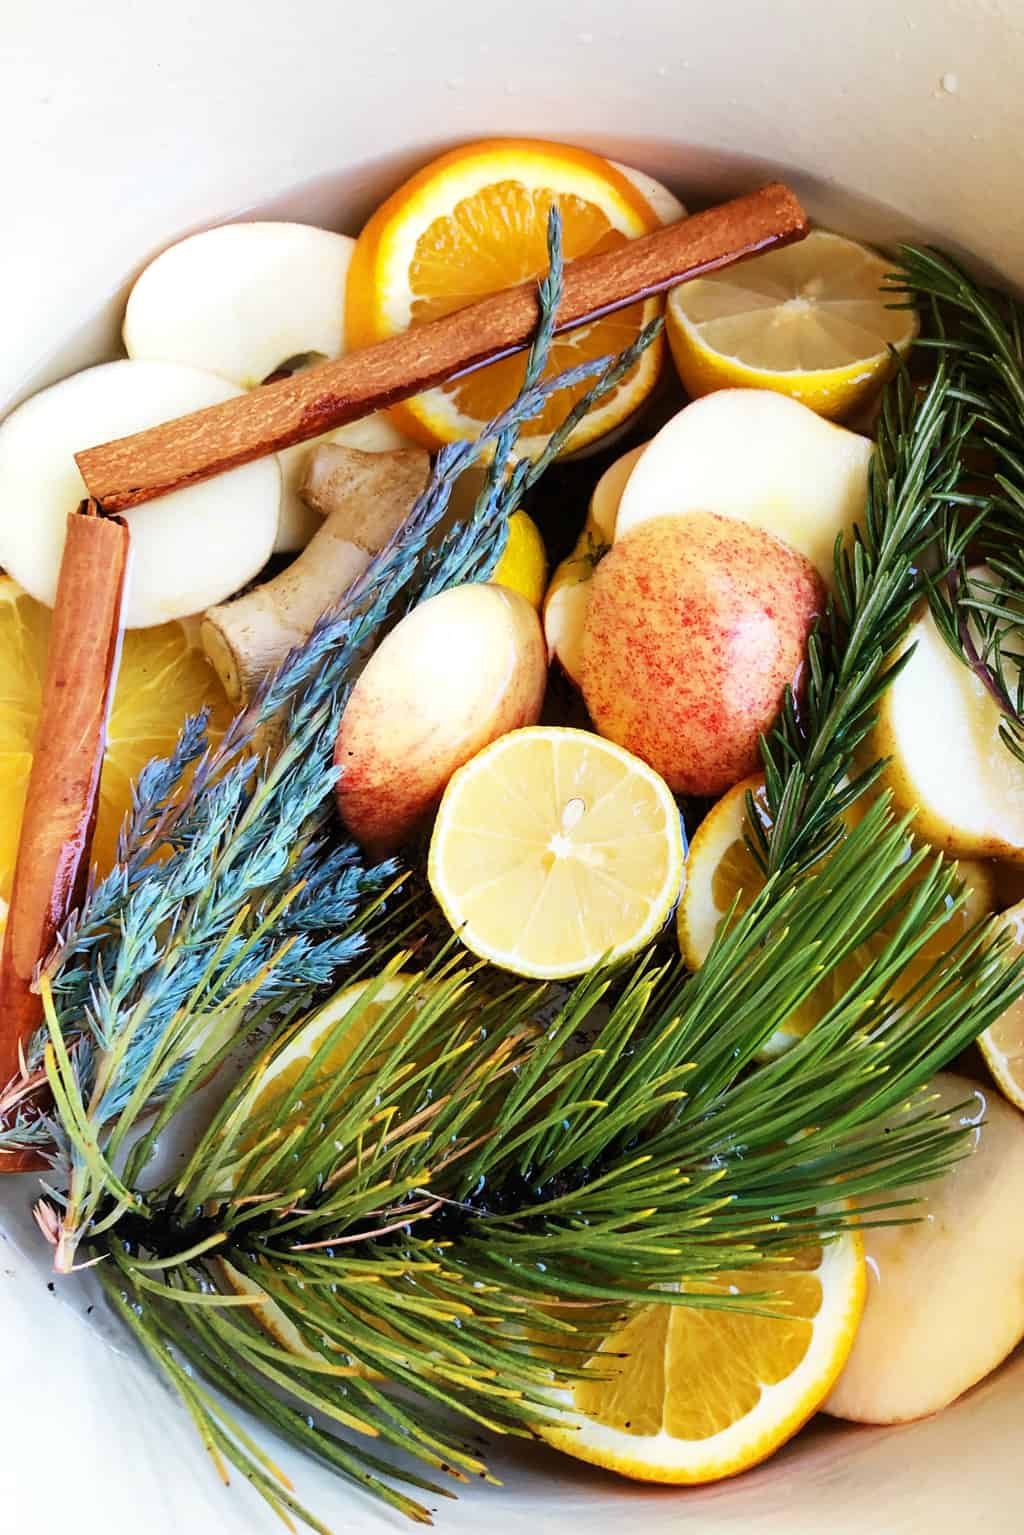 Christmas Simmer Pot (Easy & Simple Stovetop Potpourri) - The Real